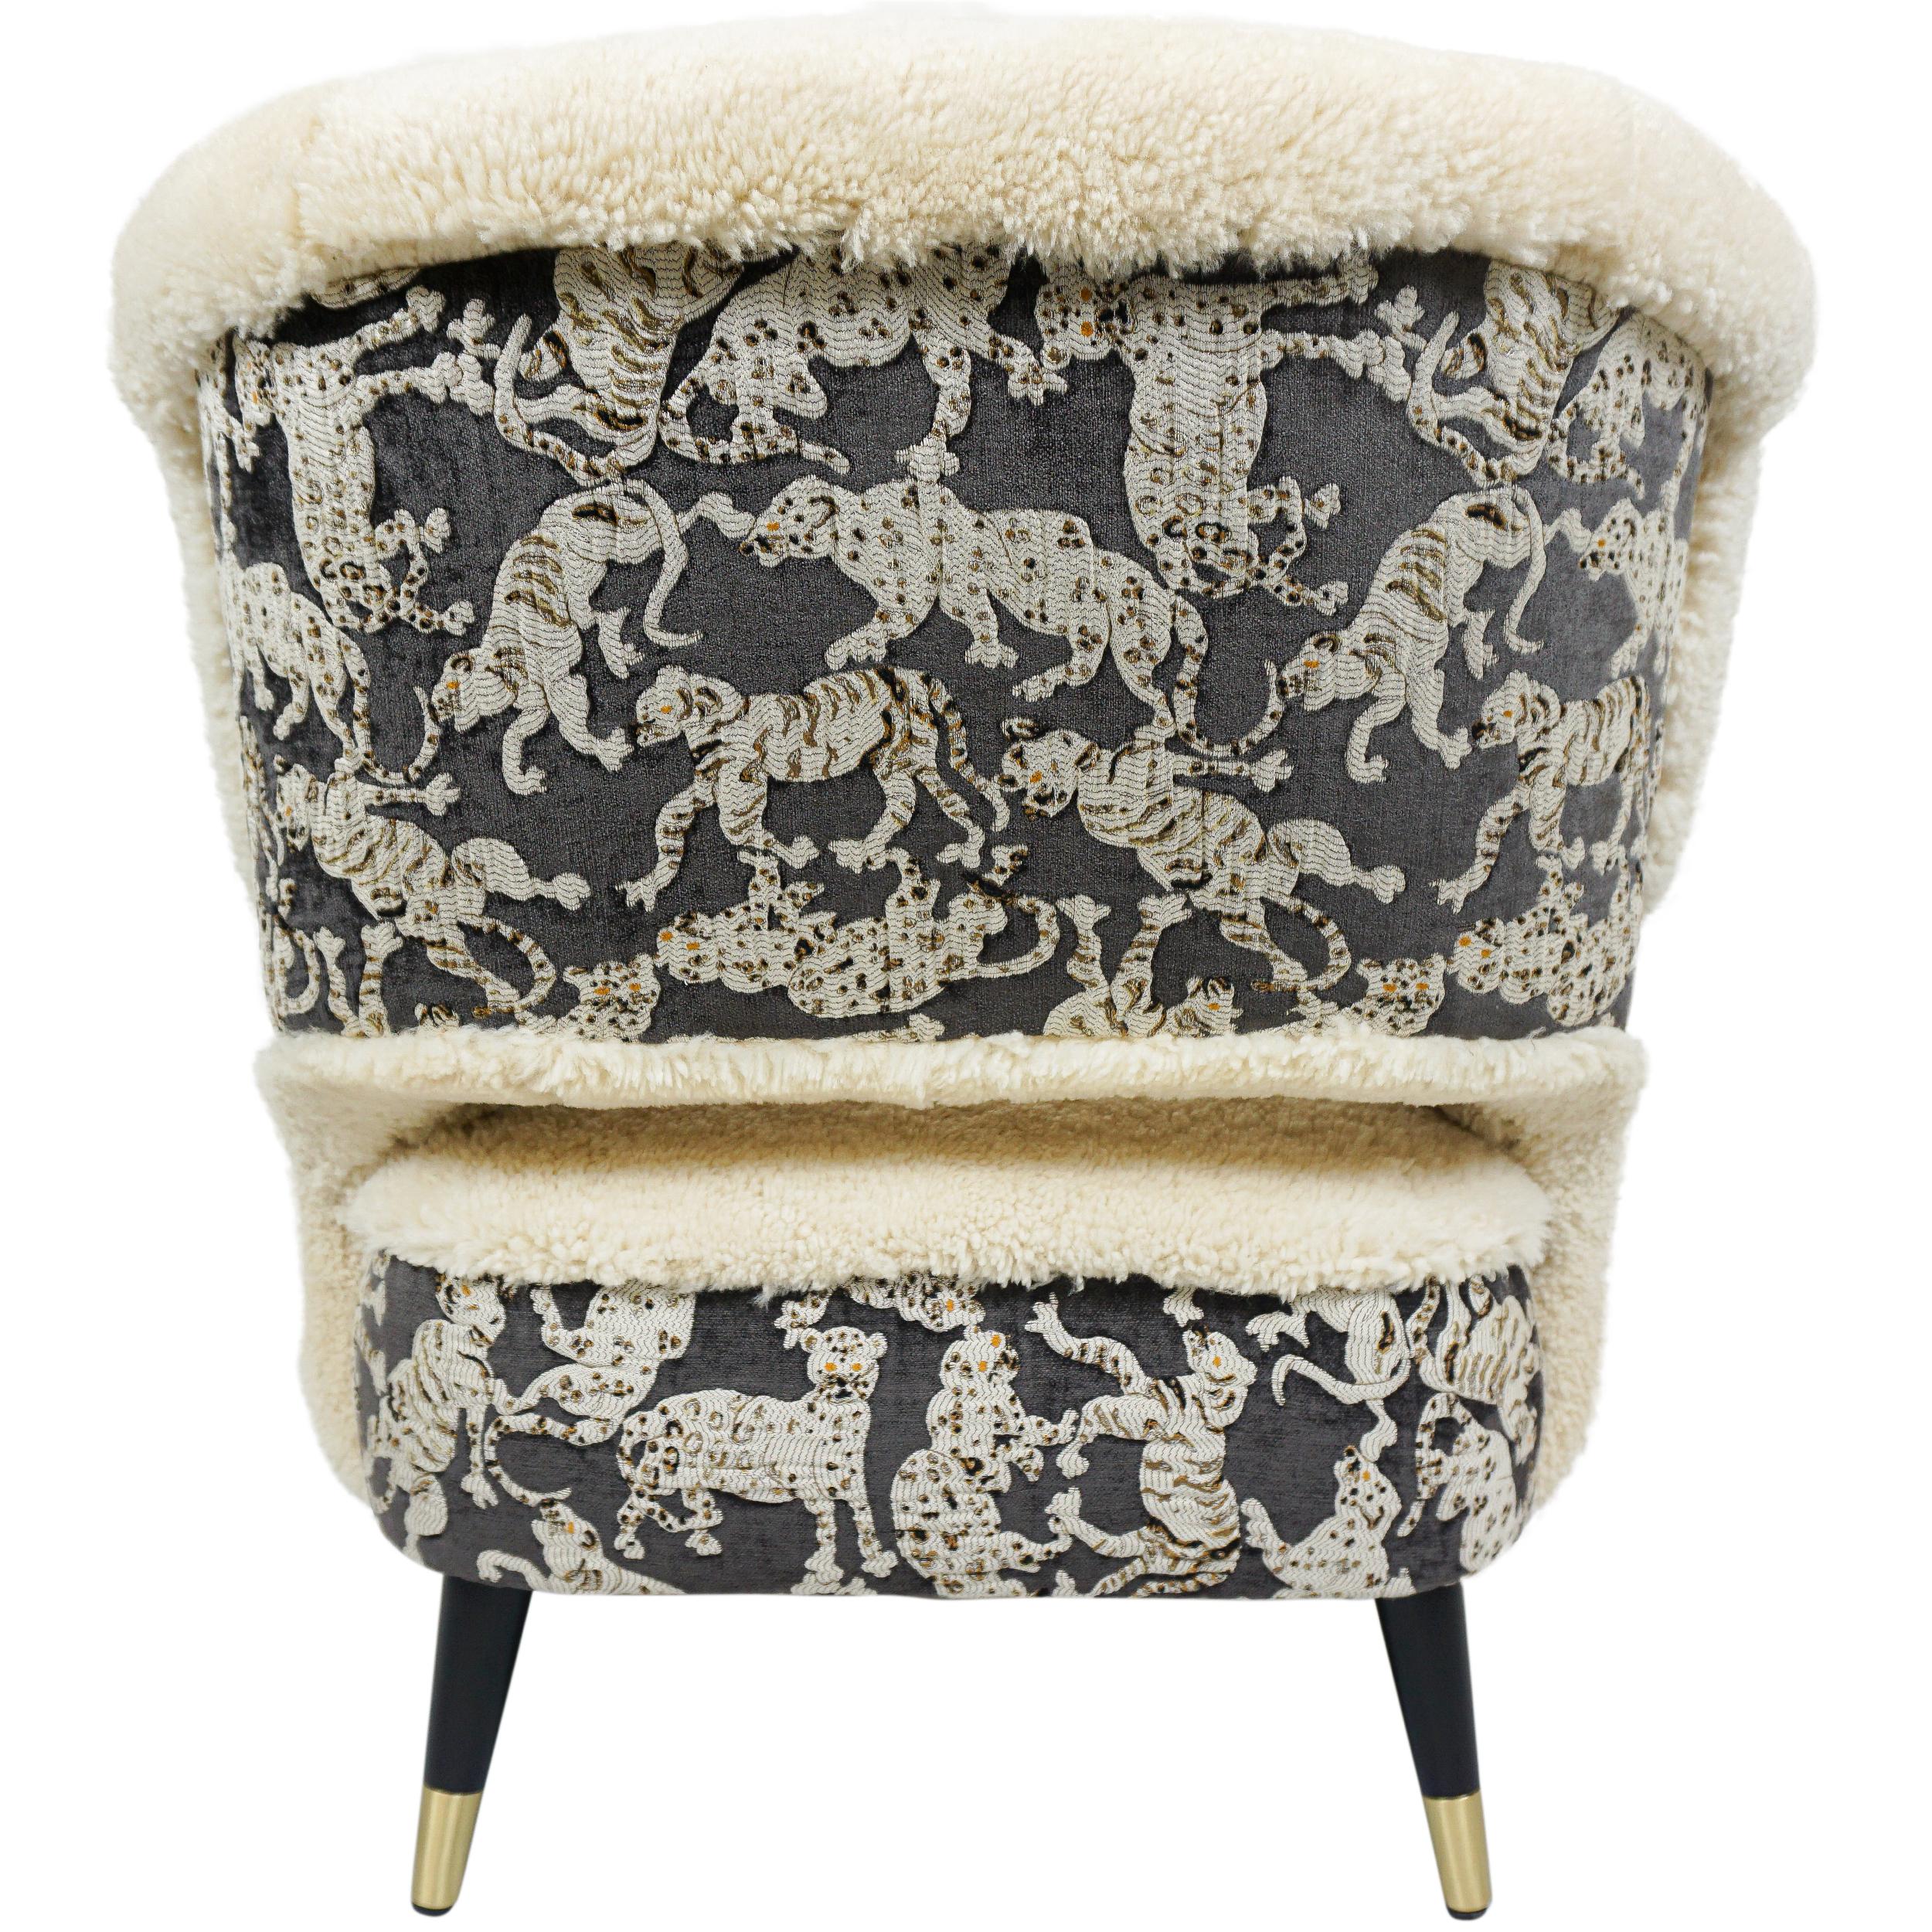 Modern Natural Shearling and Quilted Big Cat Print Club Chair with Wooden Legs For Sale 4